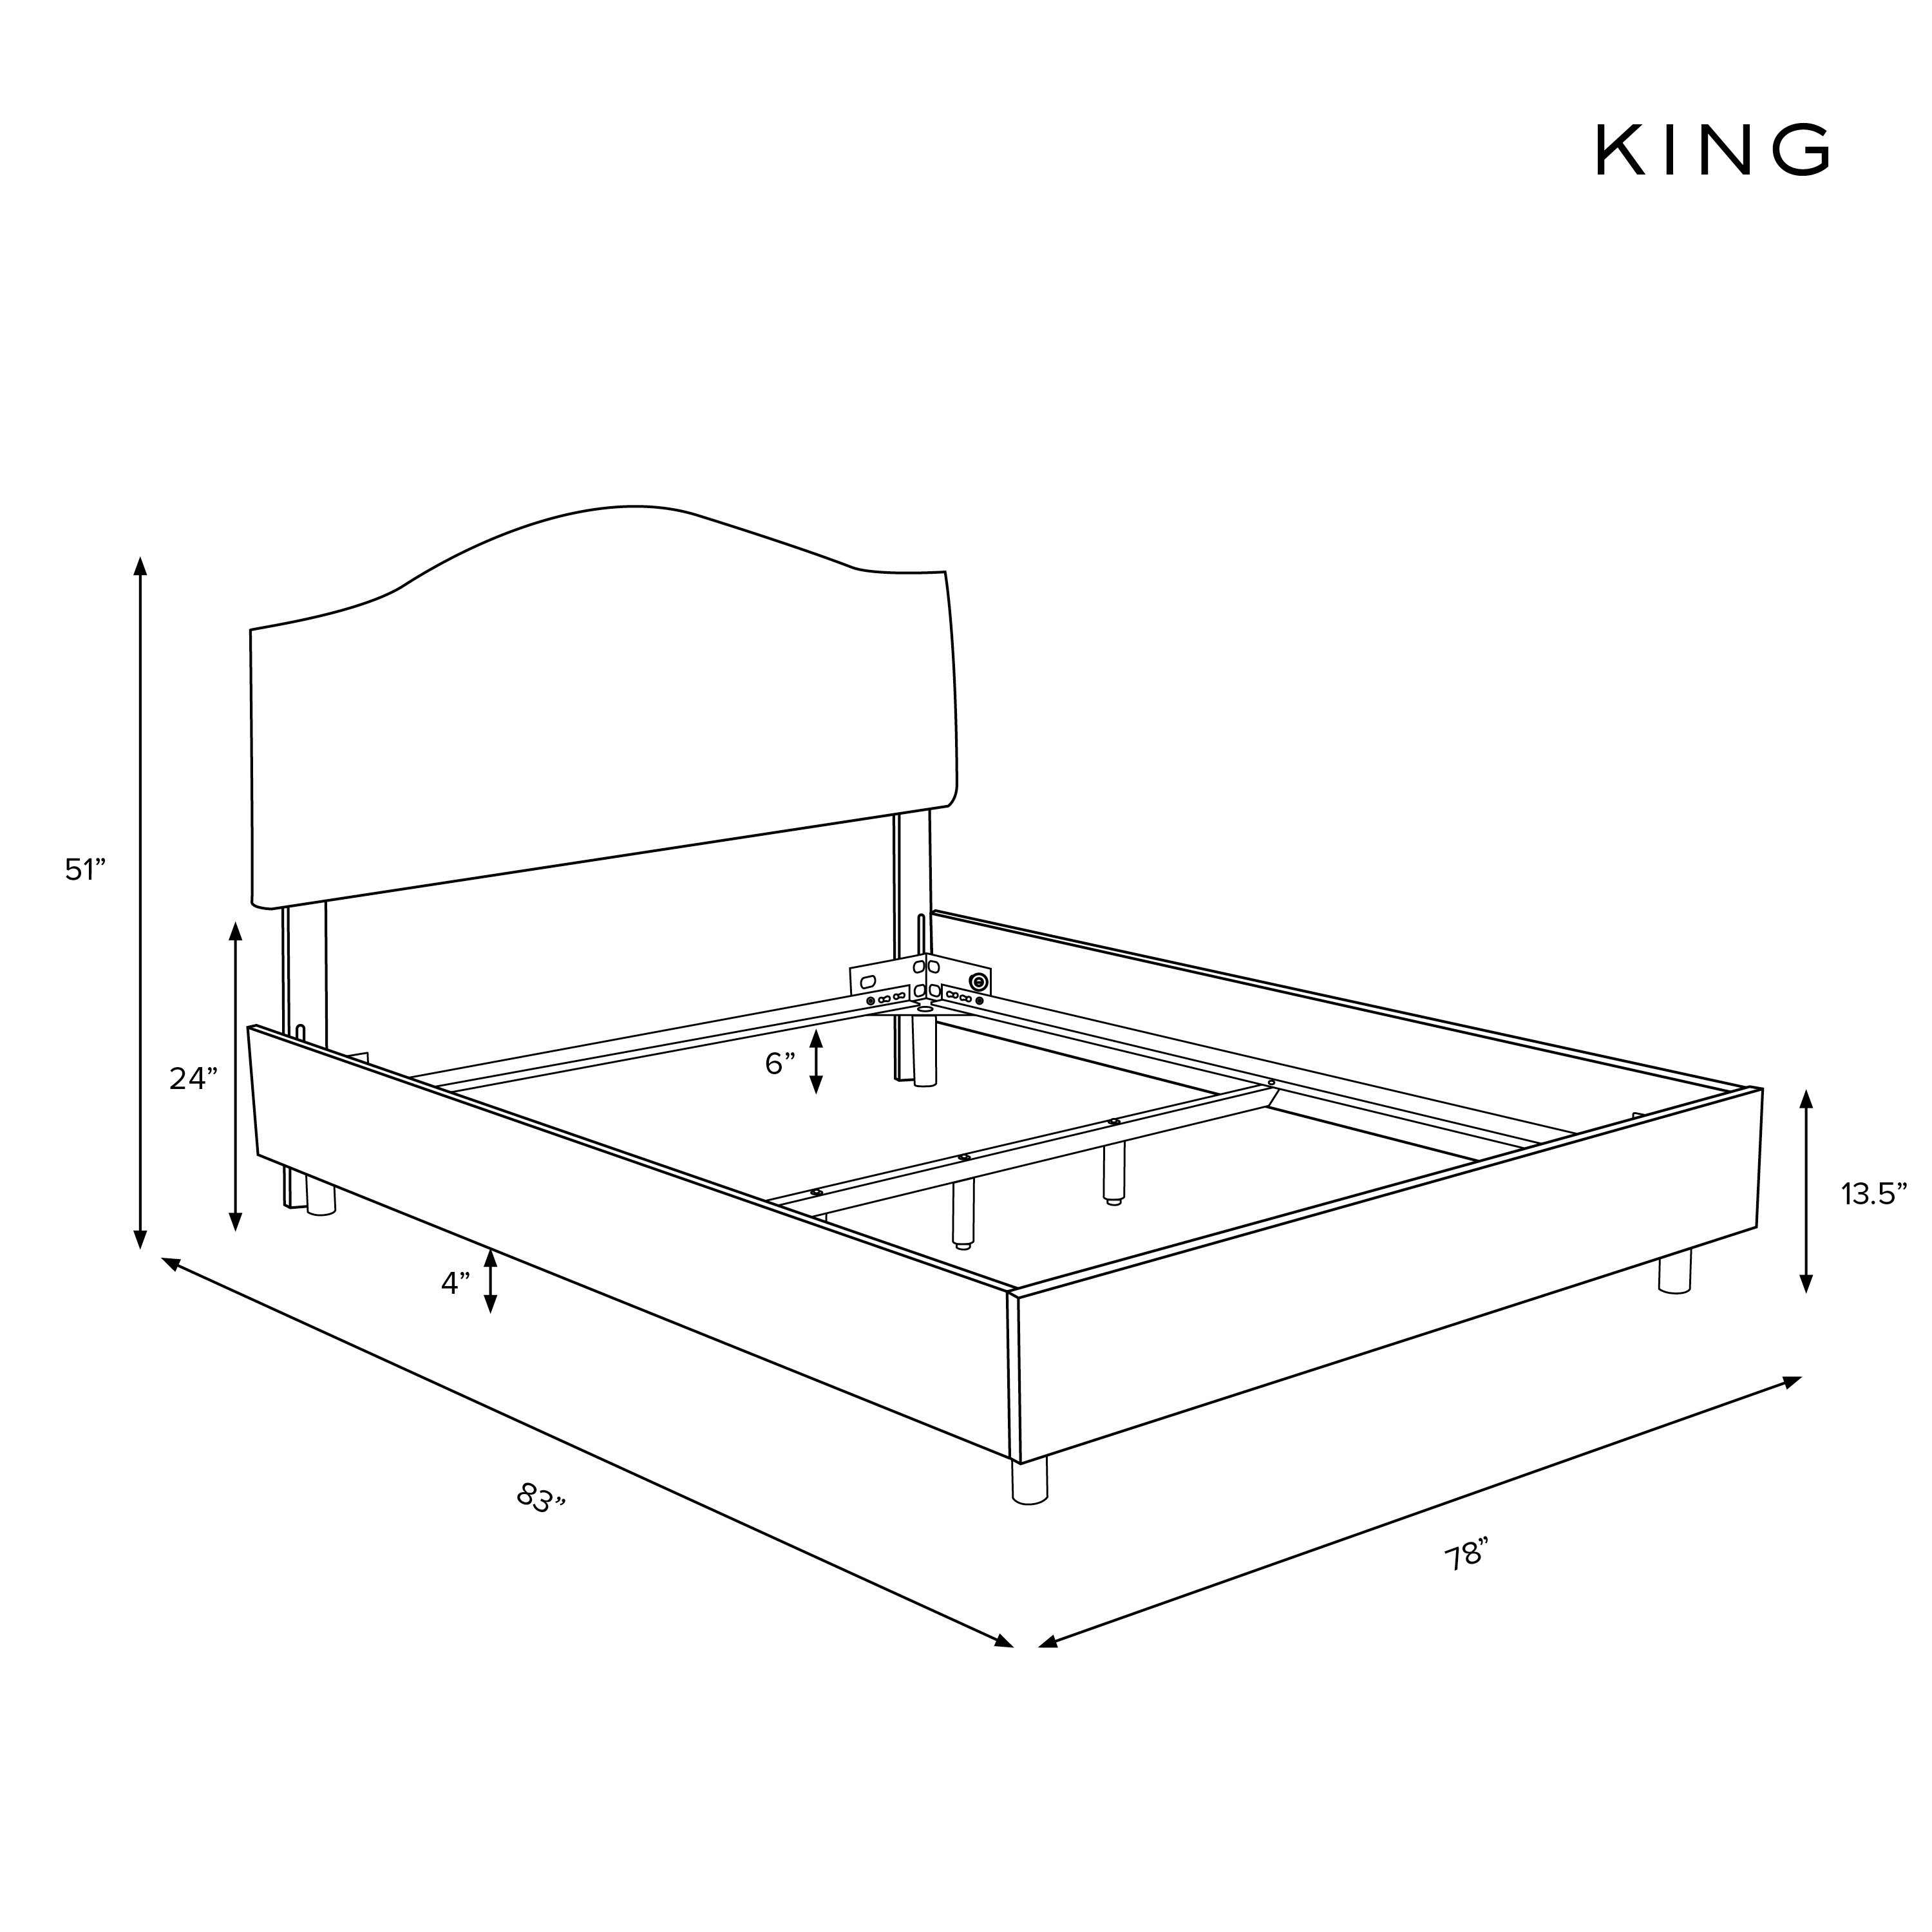 King Kenmore Bed in Zuma Linen - Image 5